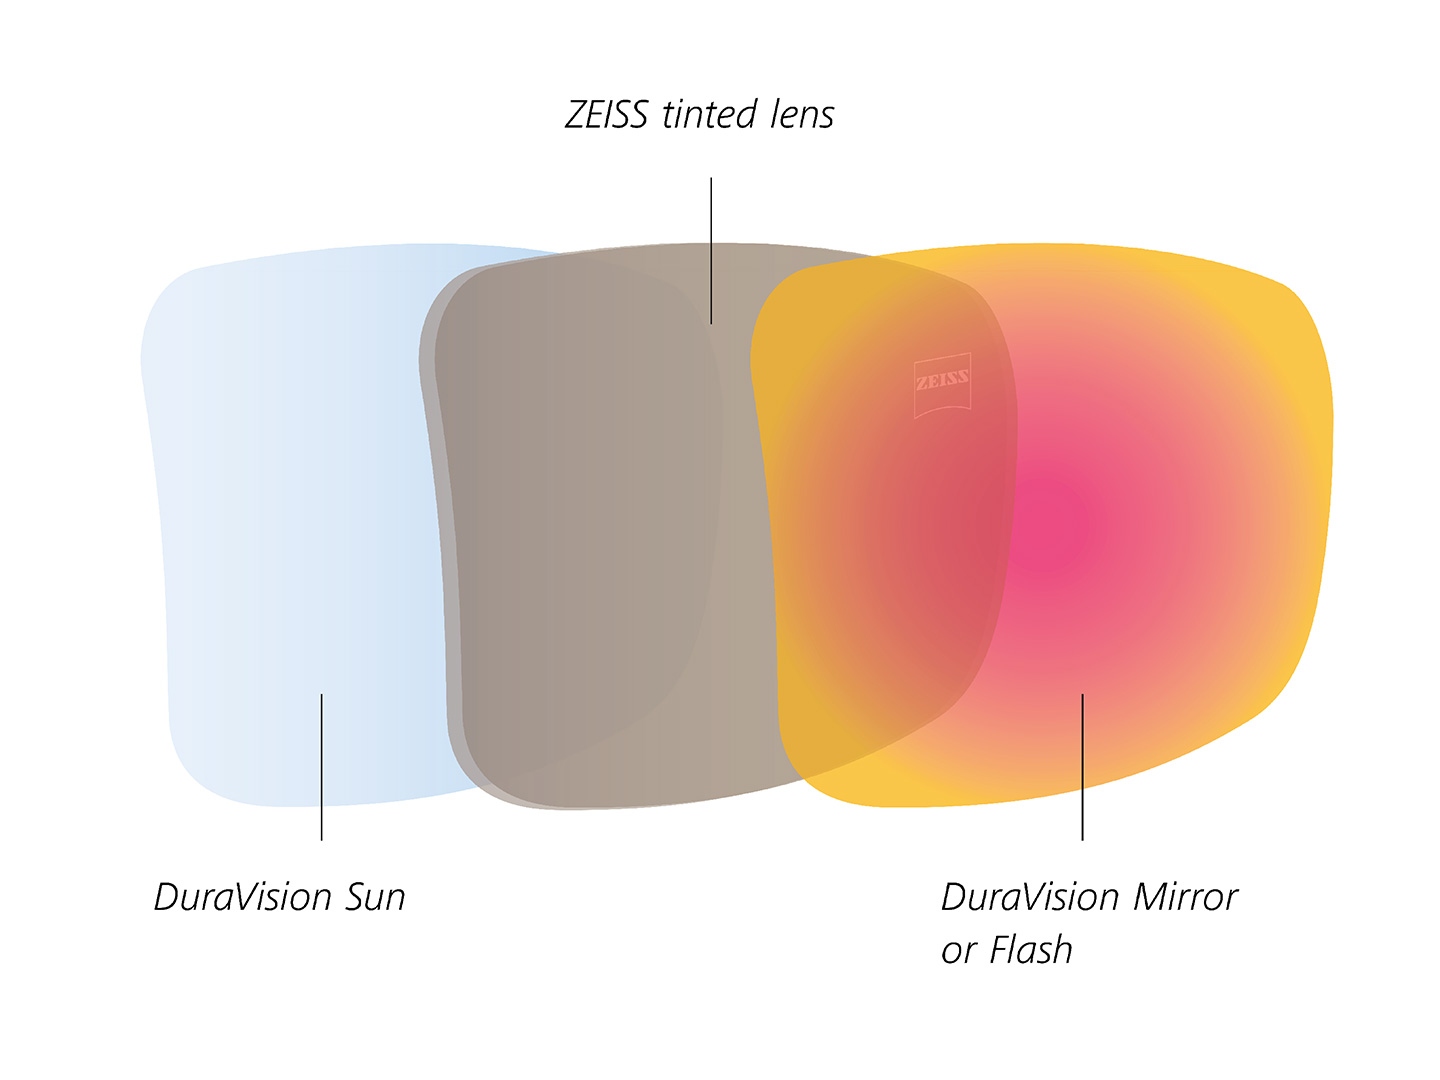 Illustration of ZEISS tinted lens with back and front lens coatings designed for sunlight 